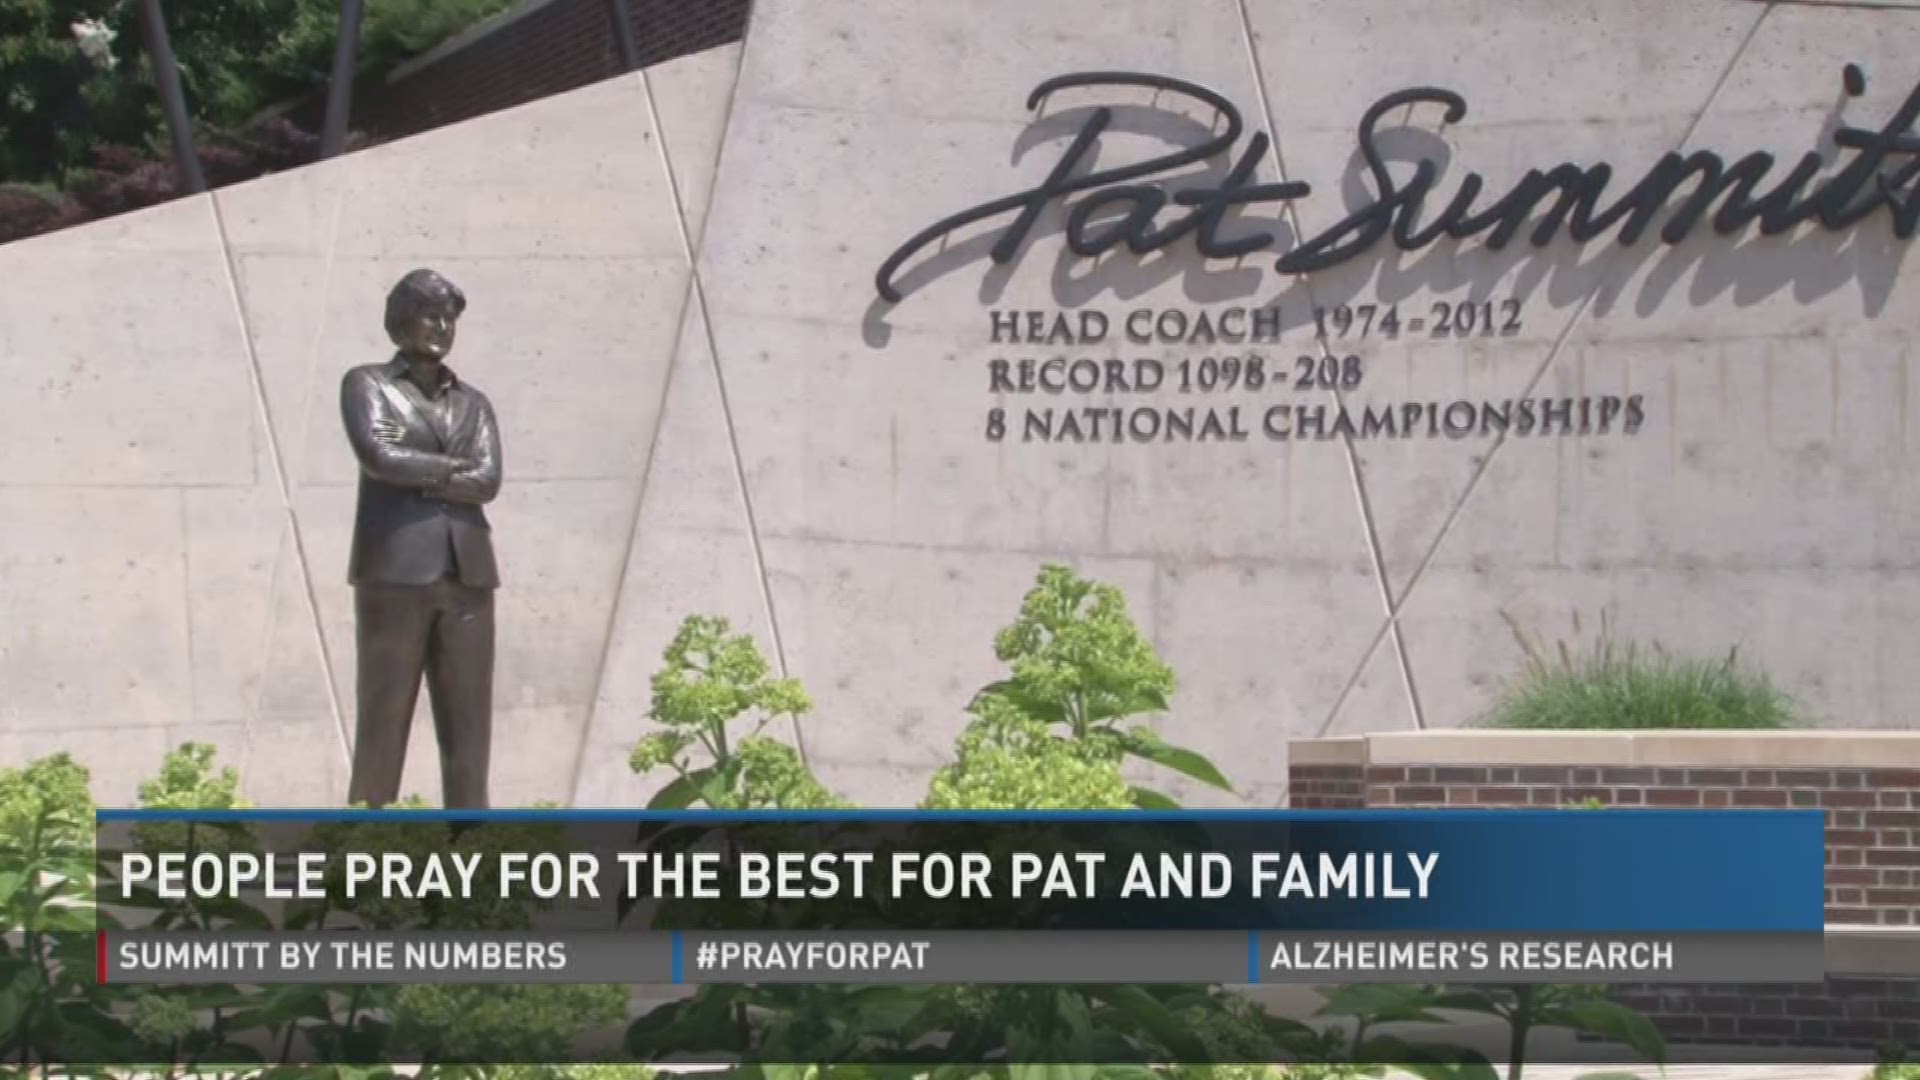 With the news that Pat Summitt's health was declining, her fans stopped by her statue on the UT campus to remember her impact on them.